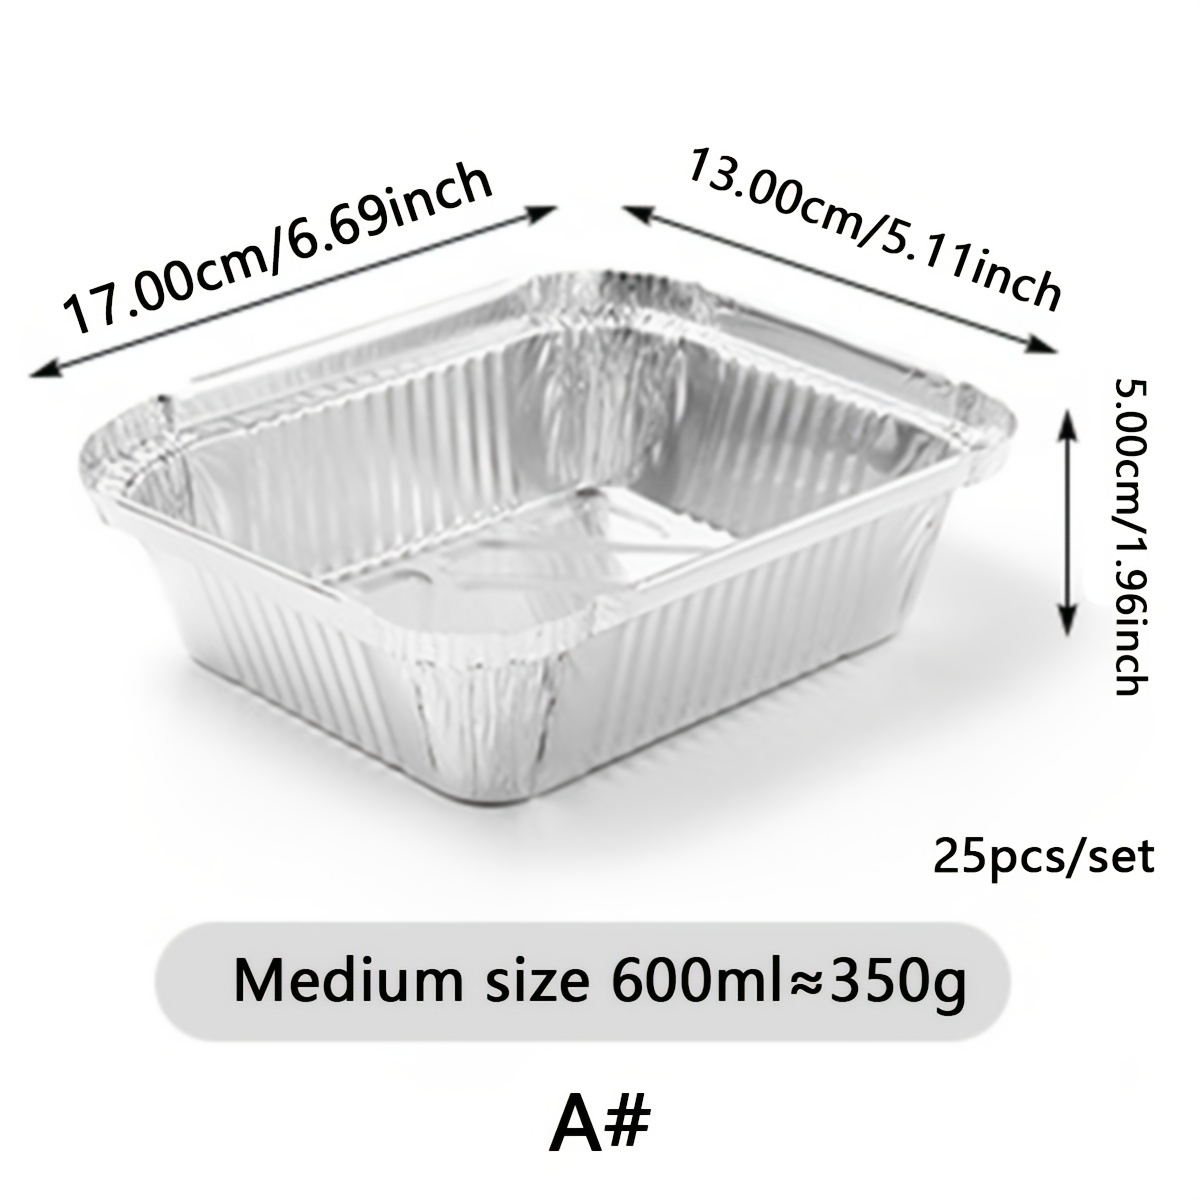 Aluminum Pans Cookie Sheet Baking Pans, Disposable Aluminum Foil Trays -Durable Nonstick Baking Sheets,for Picnic or Taking Food on A Day Trip. 50pcs